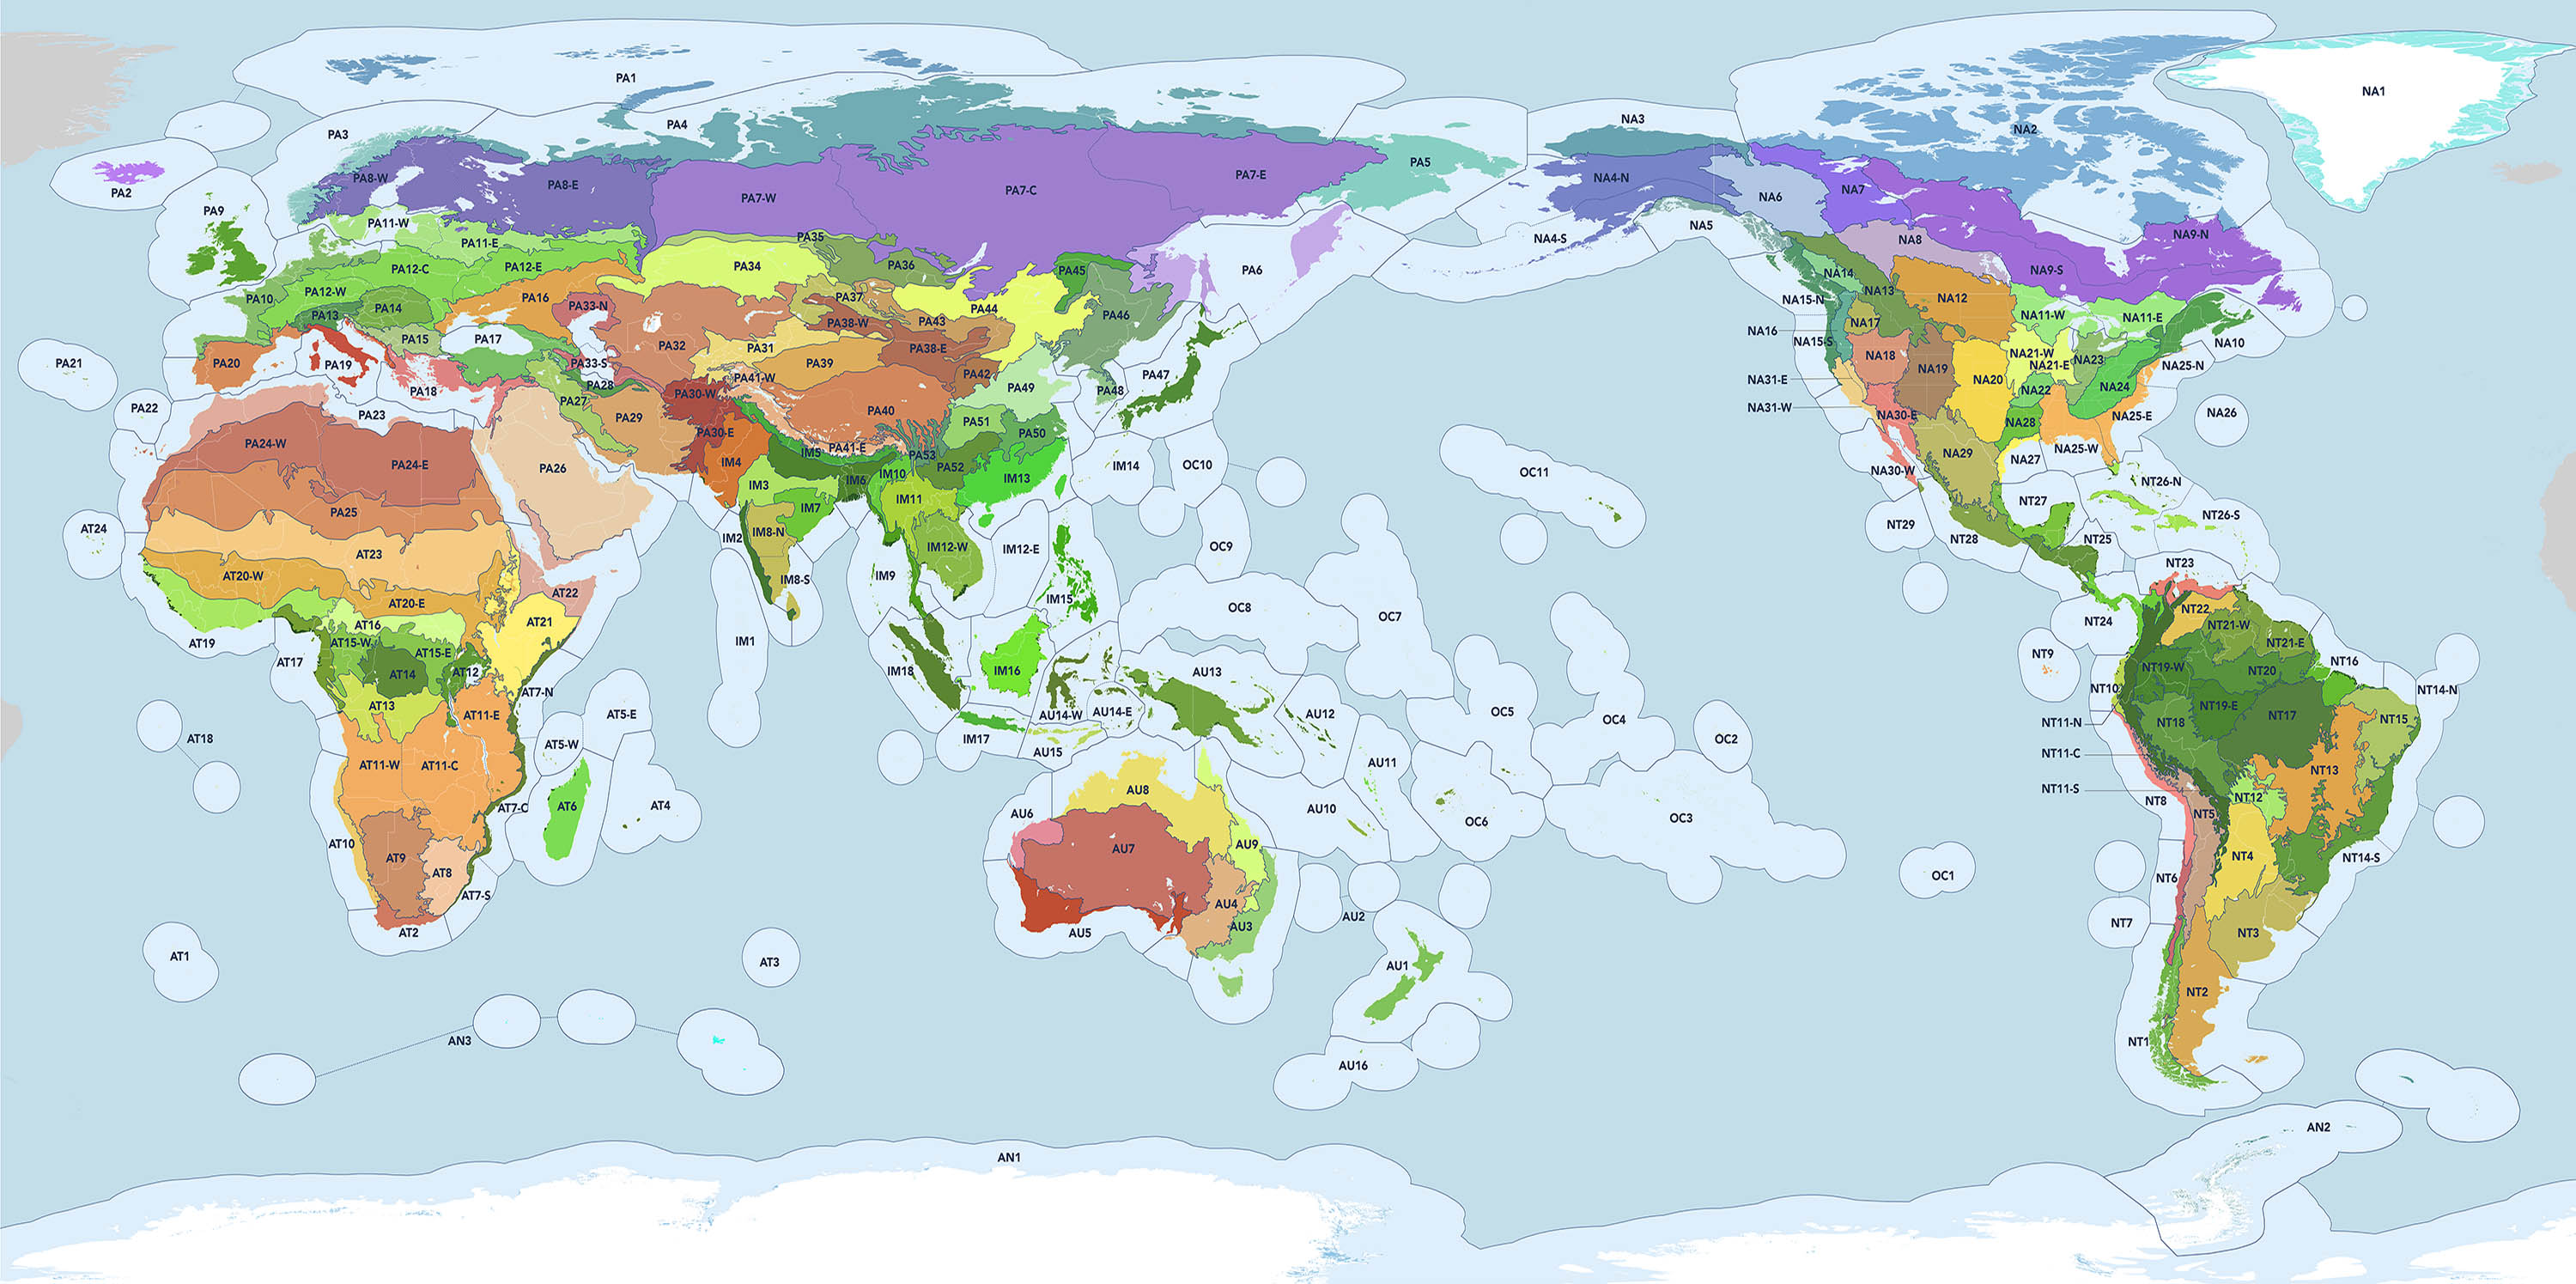 The One Earth Bioregions Framework is a new map of the Earth created by intersecting biomes with large-scale geological structures and ecoregional groupings to delineate 185 discrete bioregions.